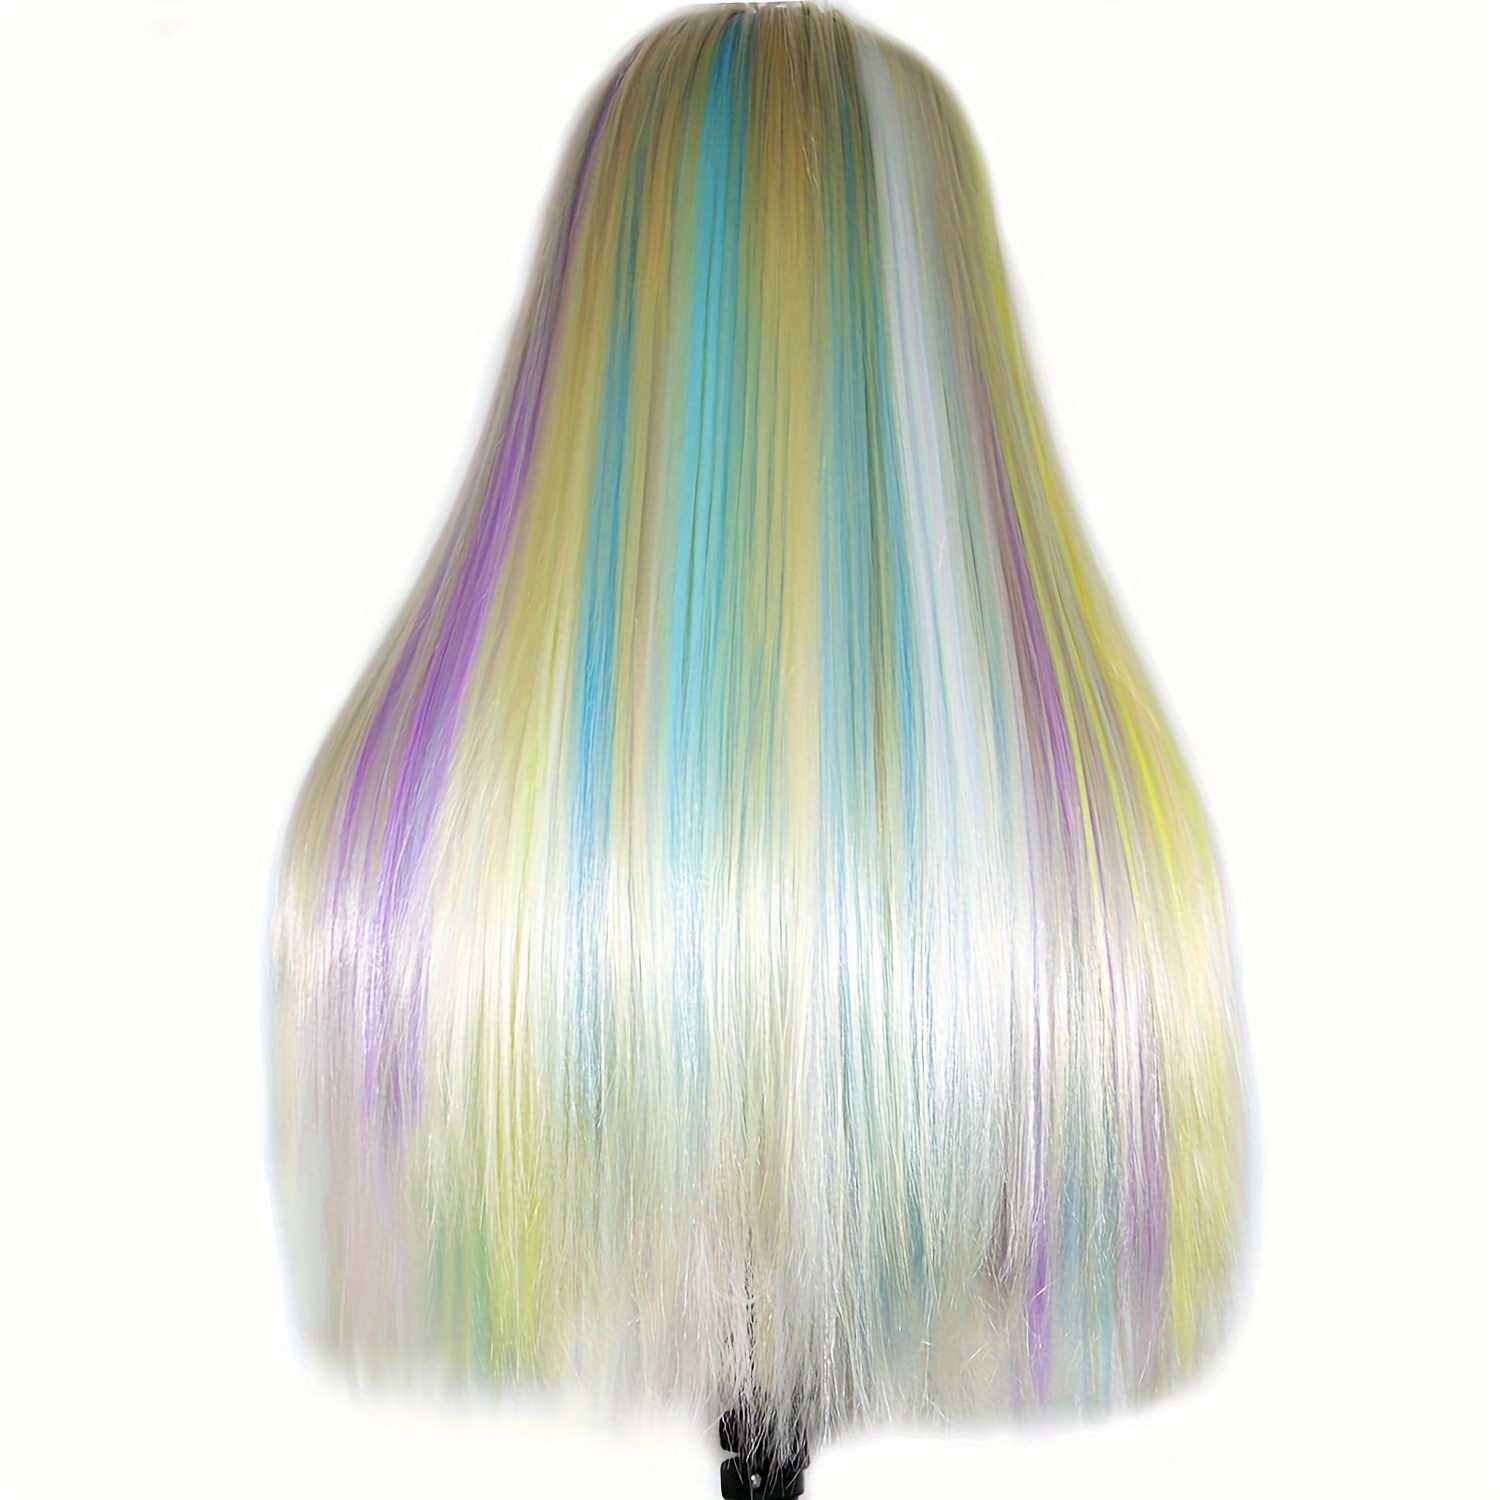 Glow in The Dark Hair Extensions, Human Hair Extensions 2pcs 20 inch Luminous Multi Colored Clip in Hairpieces Party Highlights Neon Straight